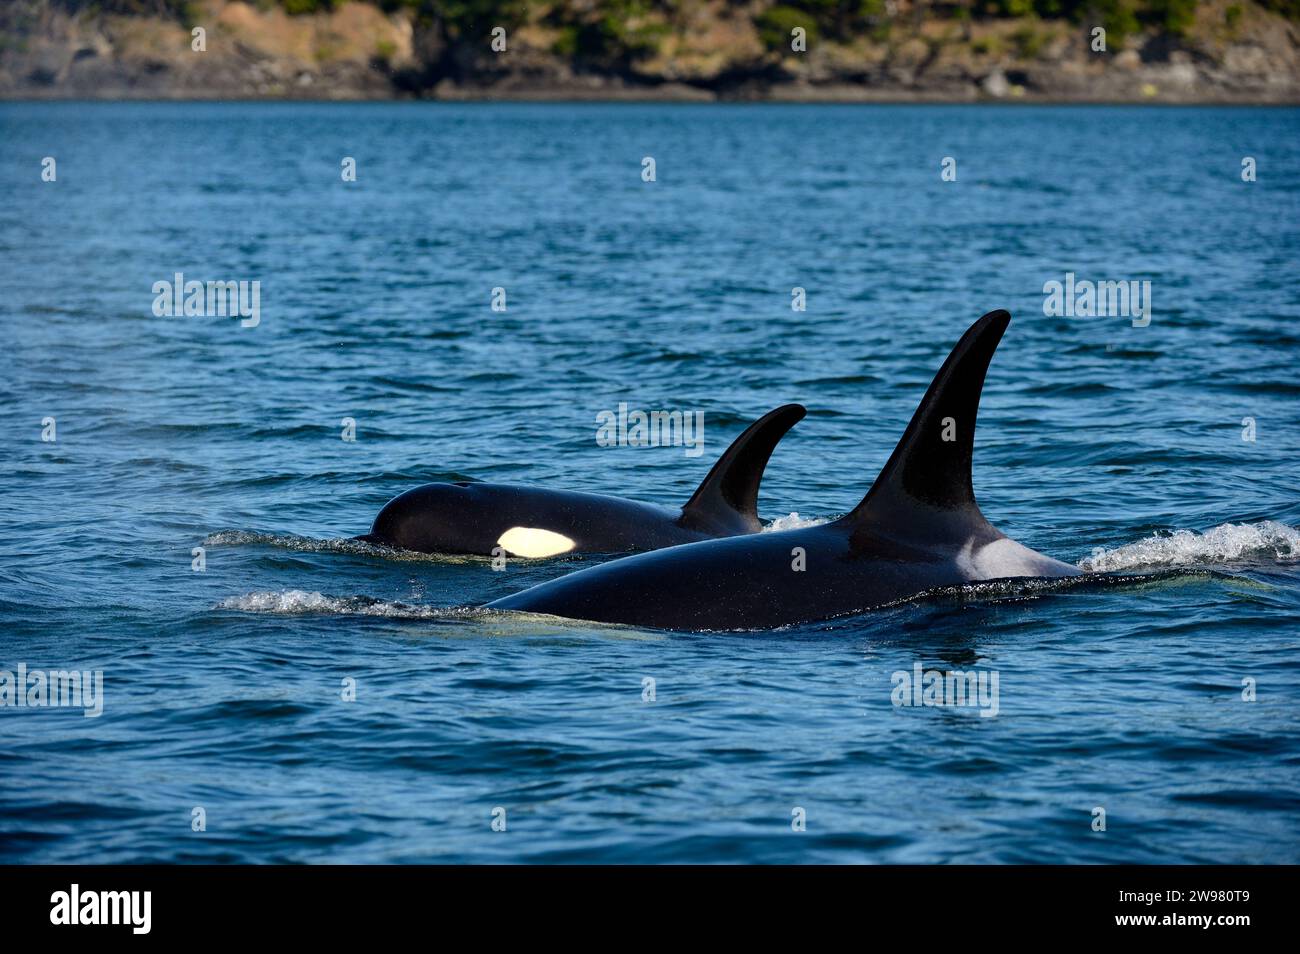 A Mom and calf orca whales, Johnstone Strait, Vancouver Island, BC Canada Stock Photo